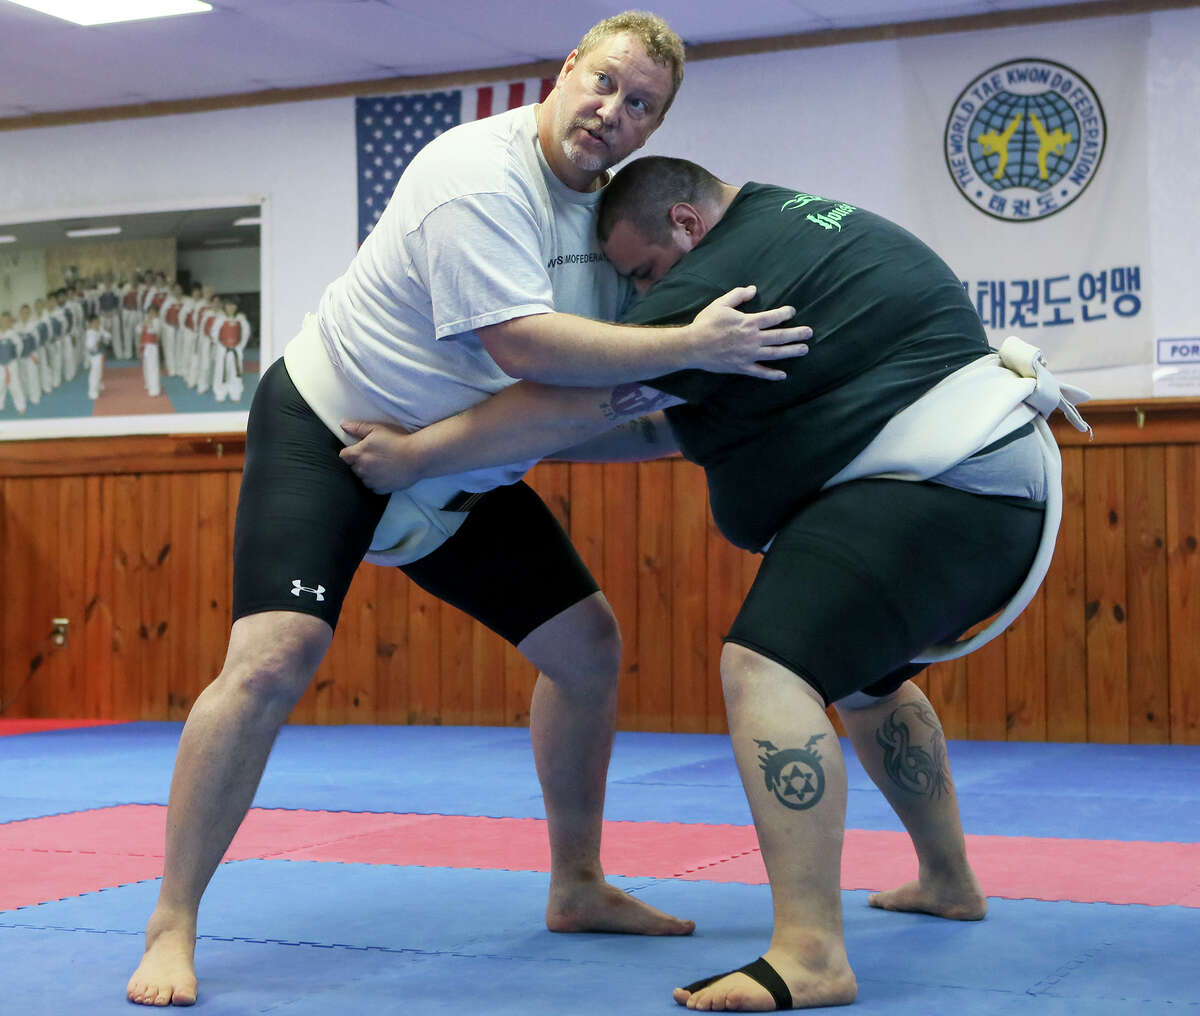 Tom Zabel (left) teaches sumo techniques with Frank Pena during a Lone Star Sumo Association practice session at the Korea-America Taekwondo Academy, 9585 Braun Rd, on Tuesday, Feb. 24, 2016. MARVIN PFEIFFER/ mpfeiffer@express-news.net